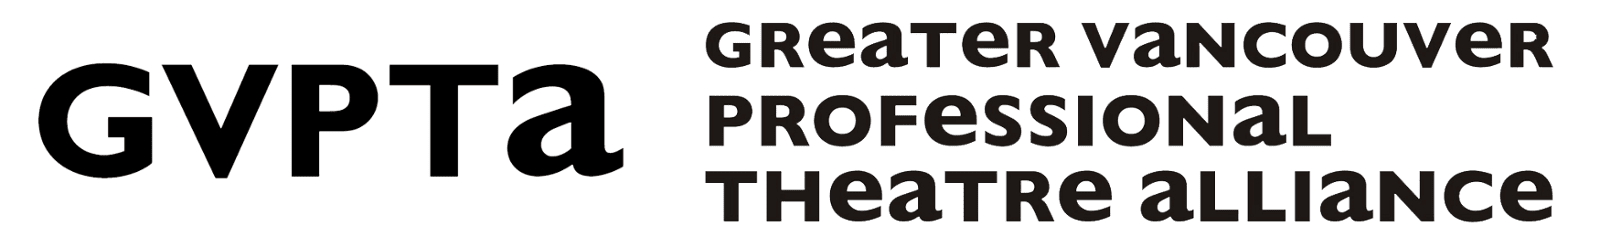 GVPTA greater vancouver professional theatre alliance wordmark. The vowels are all in lowercase.